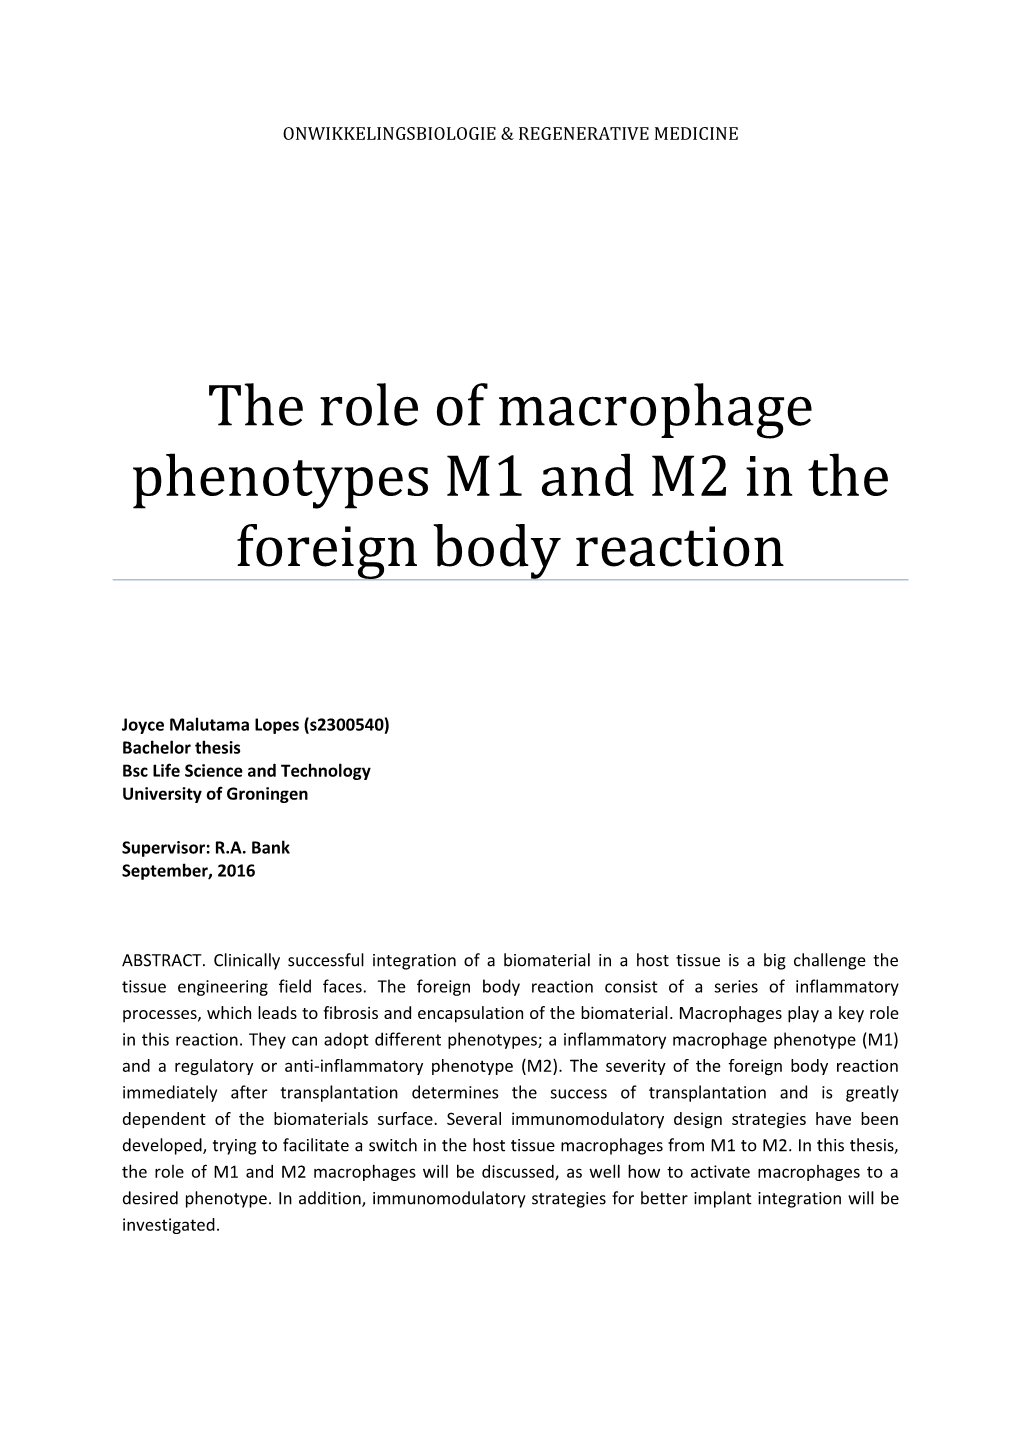 The Role of Macrophage Phenotypes M1 and M2 in the Foreign Body Reaction